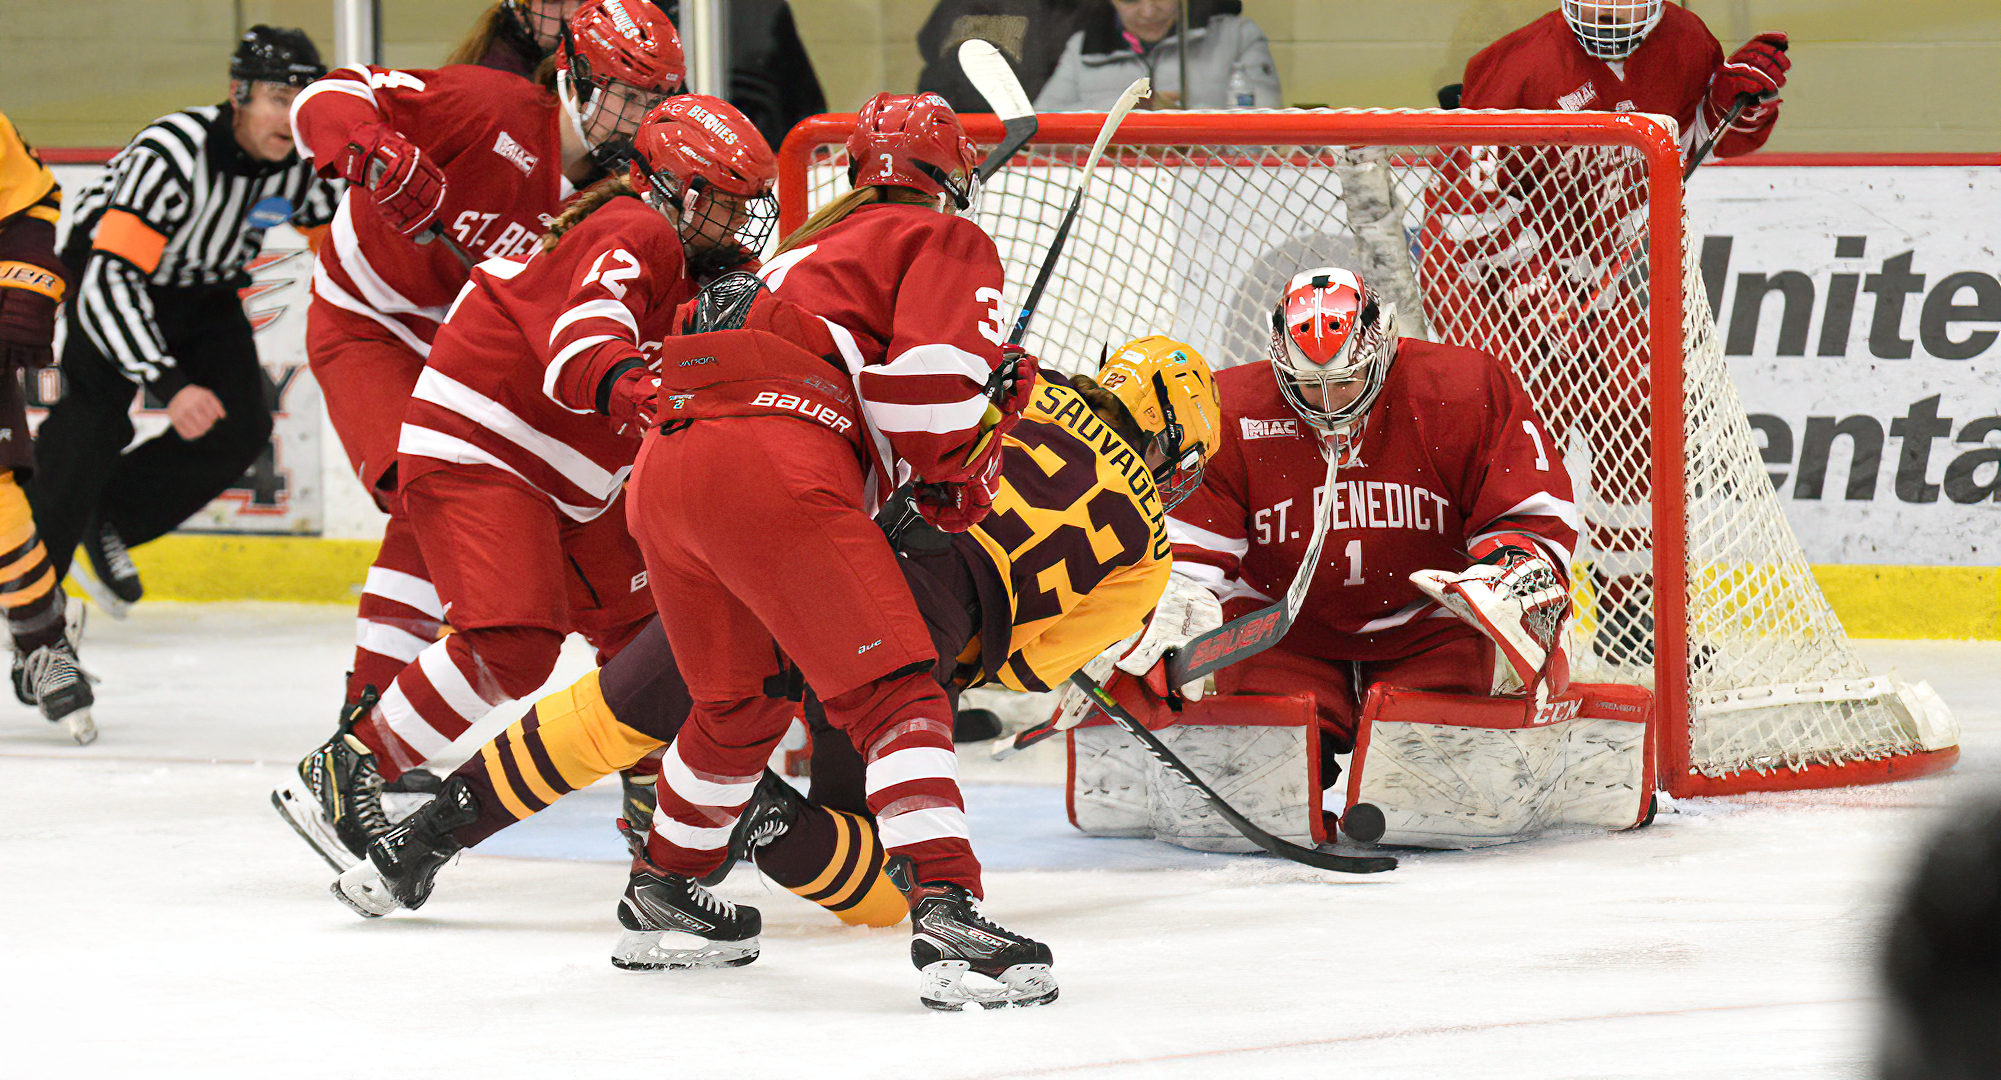 Morgan Sauvageau gets knocked to the ice by a pair of St. Ben's defenders as she tries to connect on the game-tying goal in the third period.